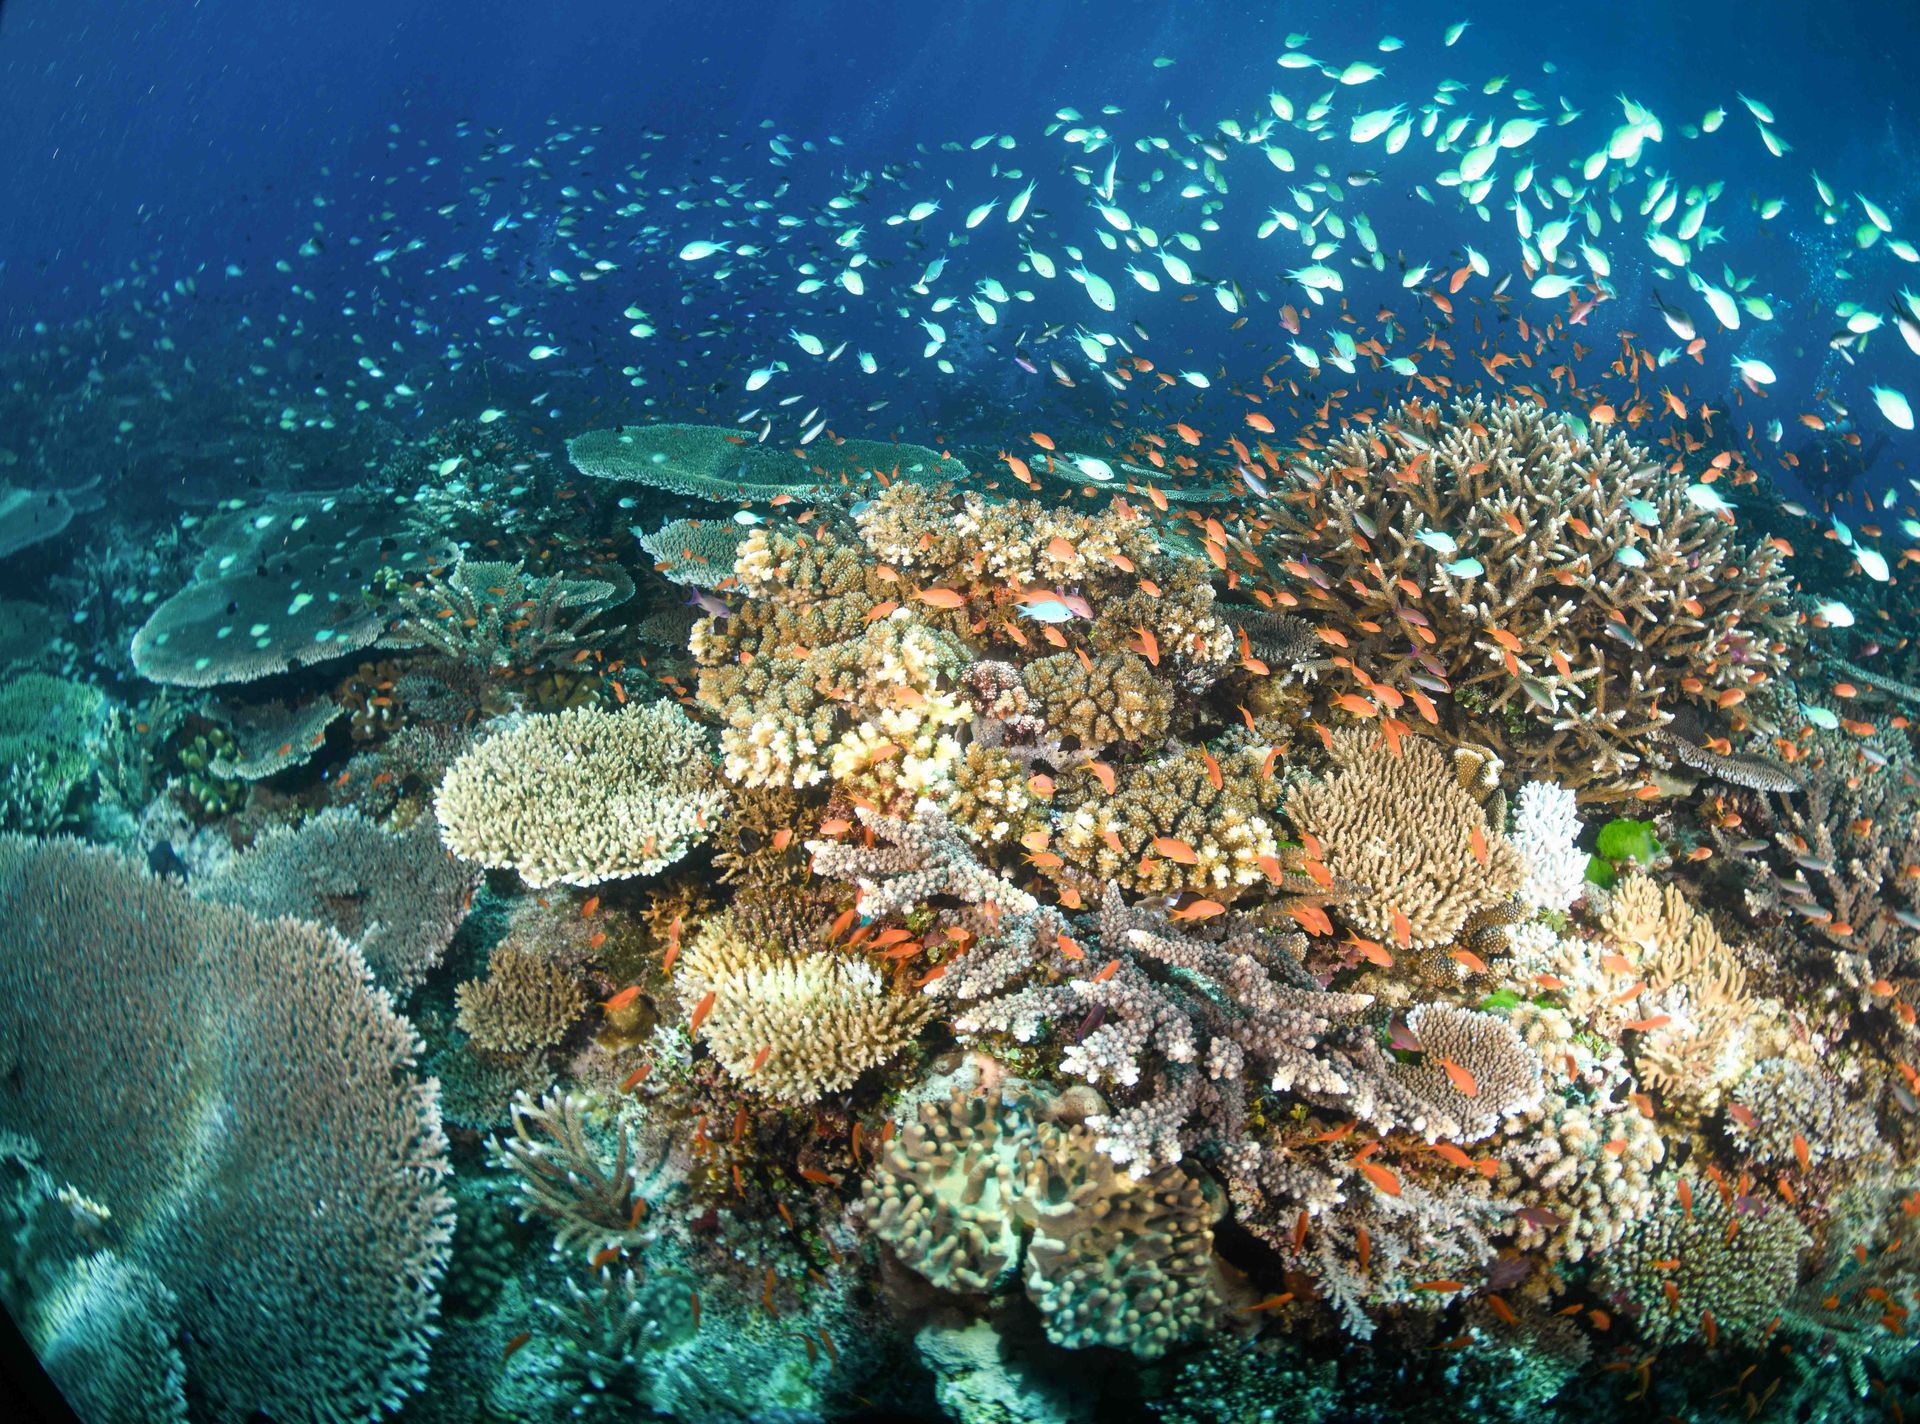 Small blue reef fish swim over the hard coral garden on a coral reef in Fiji.